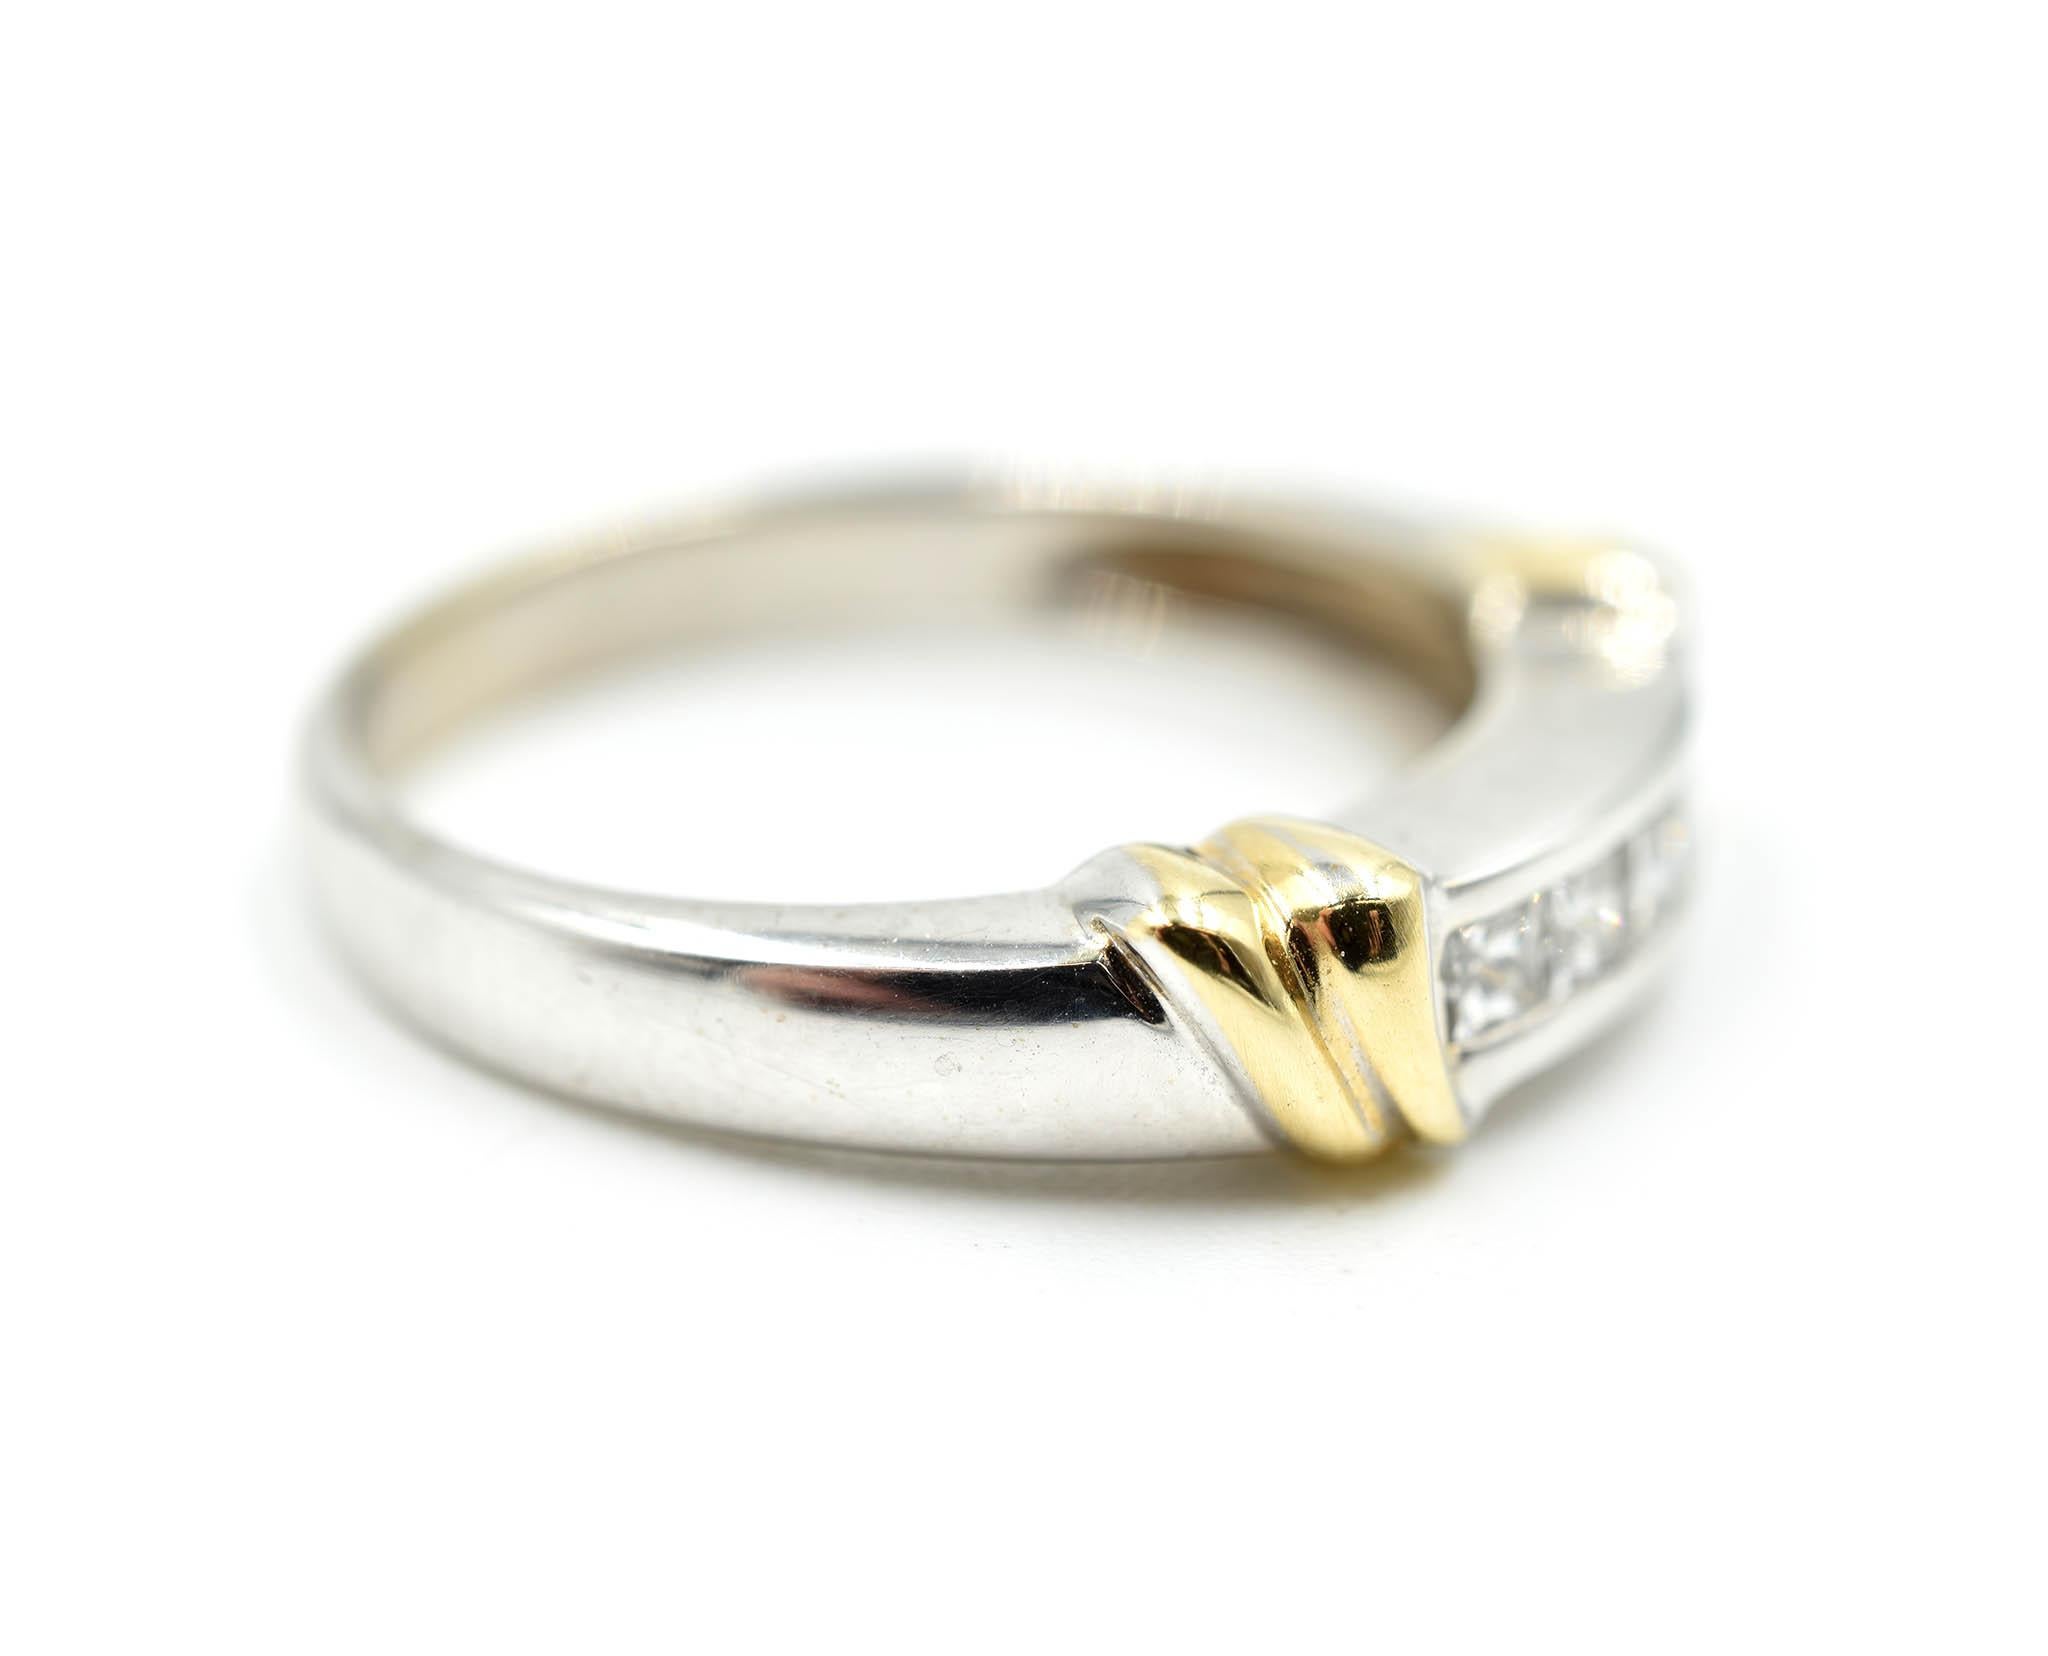 Designer: custom design
Material: 14k white/yellow gold
Diamonds: 6d = 0.50cttw
Ring size: 5.75 (please allow two additional shipping days for sizing requests)
Dimensions: band width measures 3.80mm
Weight: 4.38 grams

